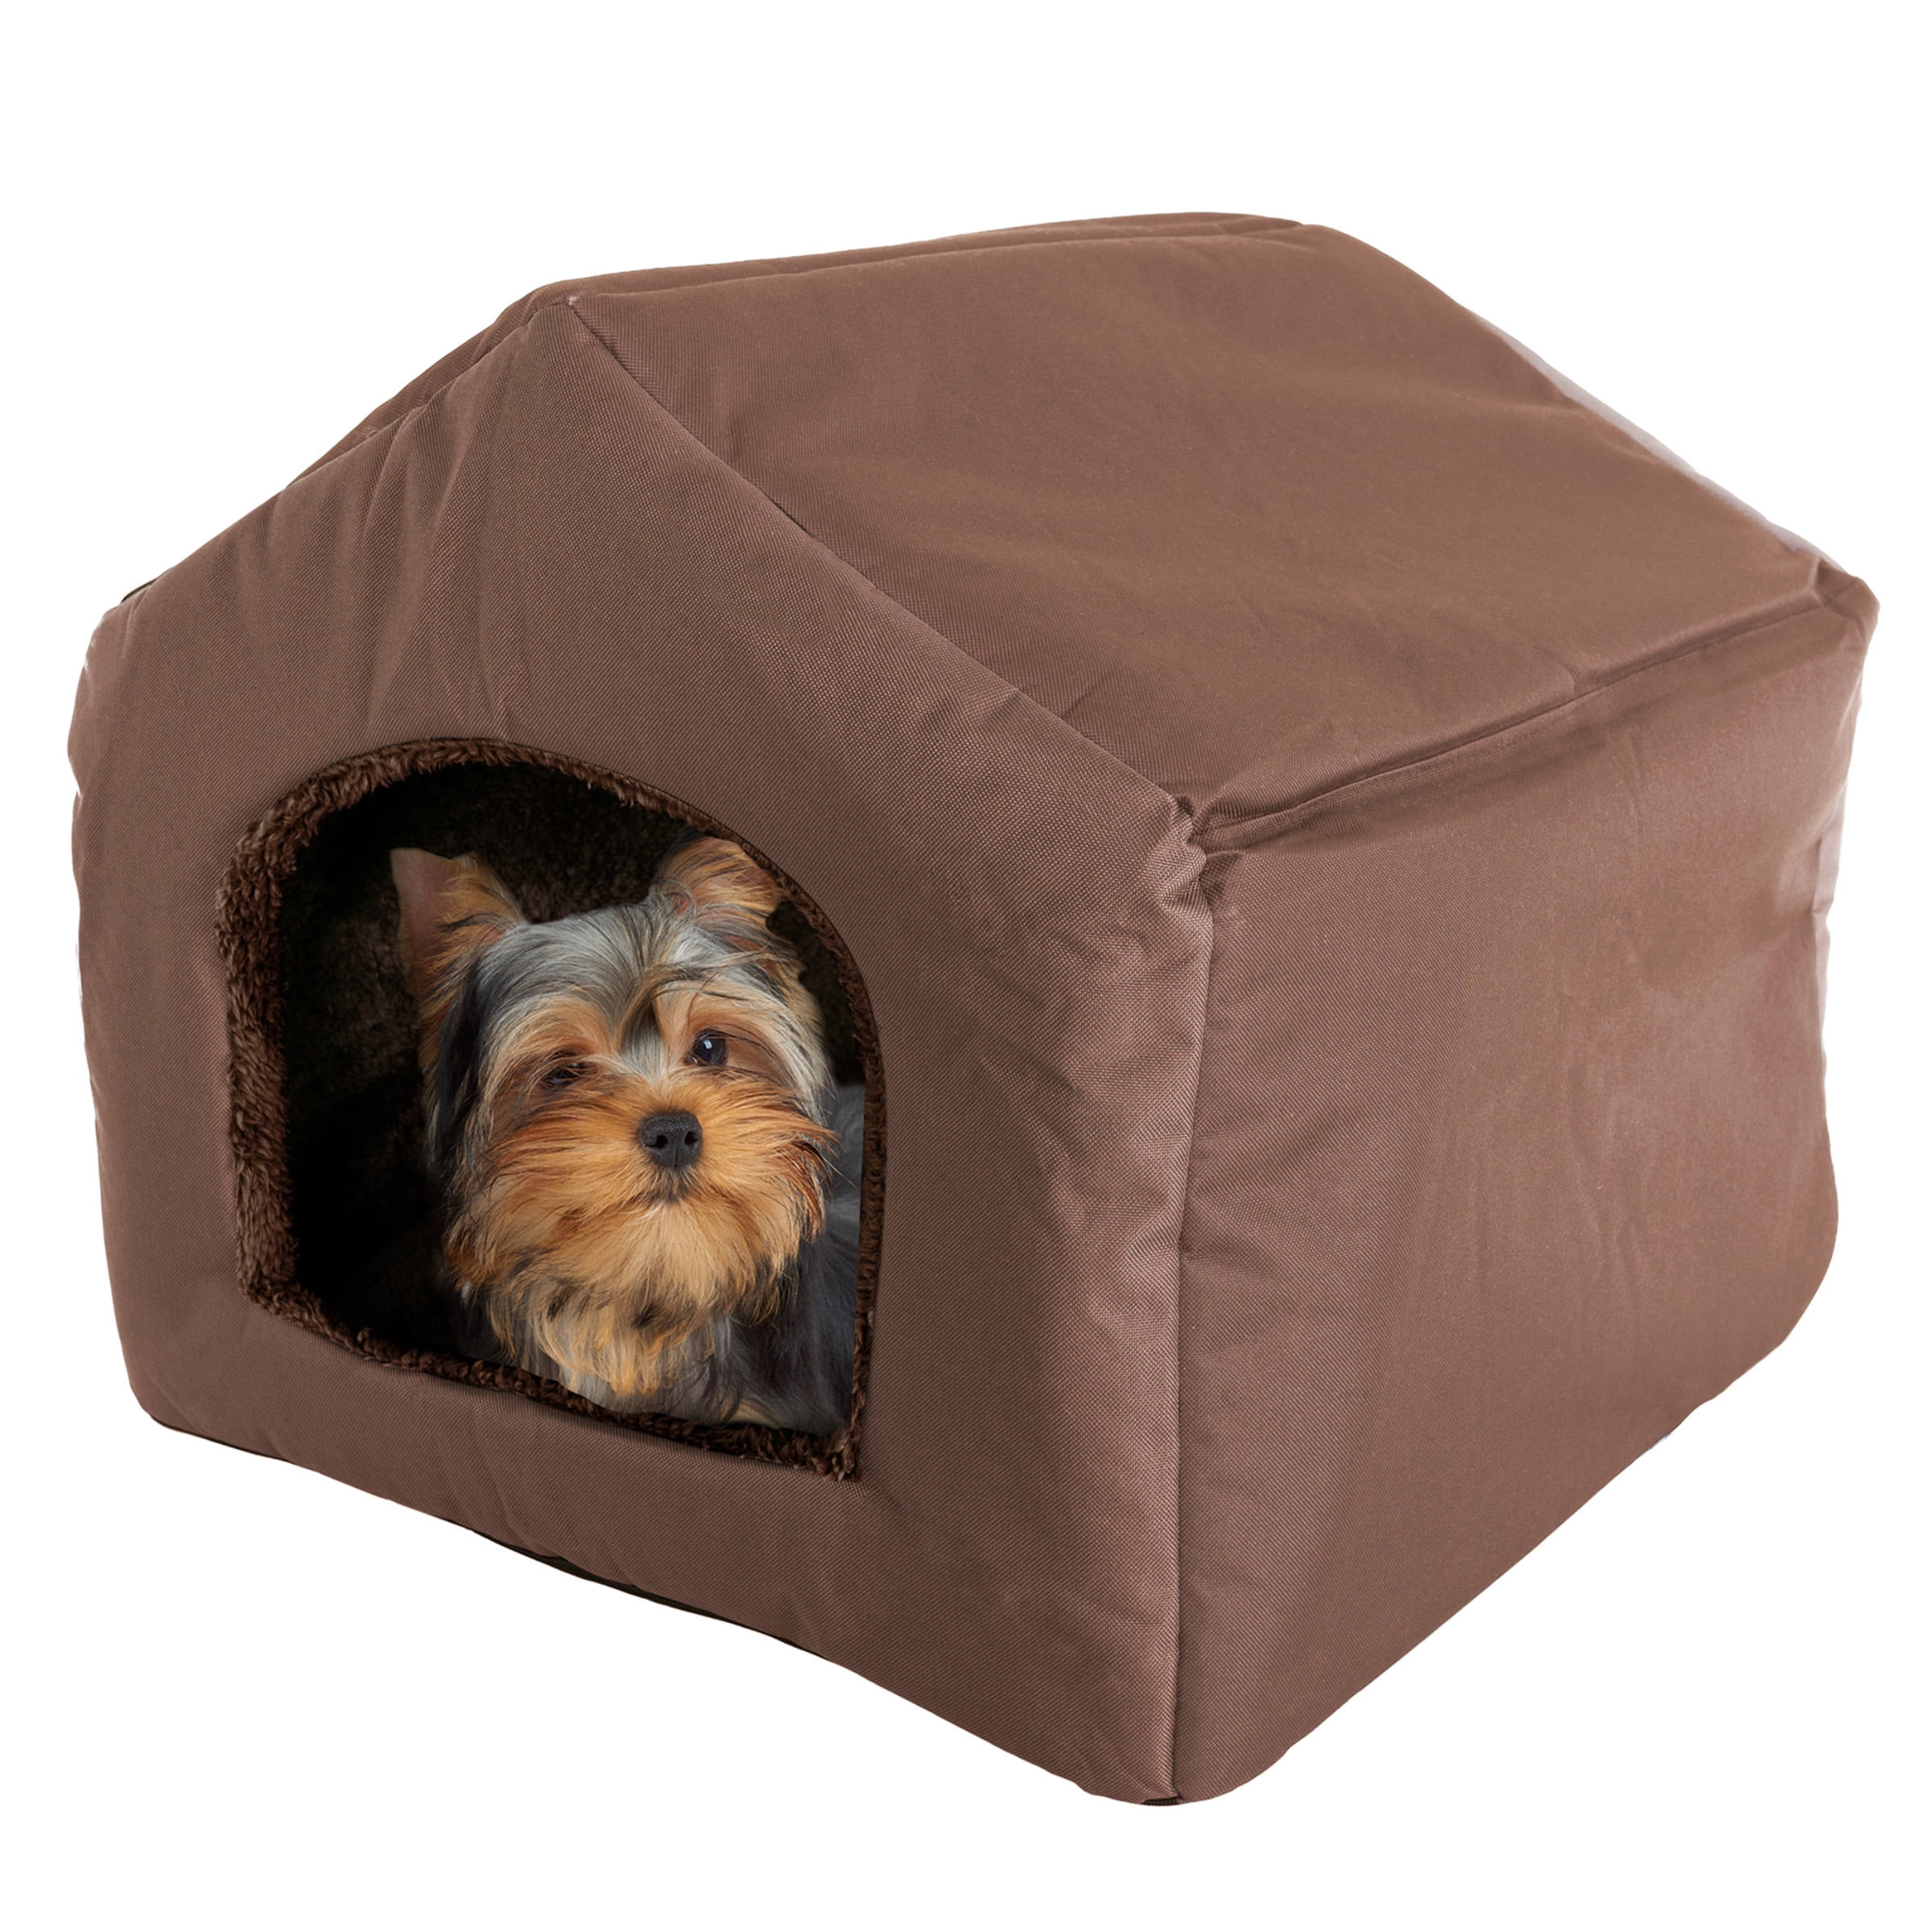 Openg Cat Tent Dog Shade Tent Puppy House Dog House Outdoor Dog Bed Pop Up Dog Tent Dog Bed With Sun Shade Cat Tents For Indoor Cats Waterproof Dog Tent blue